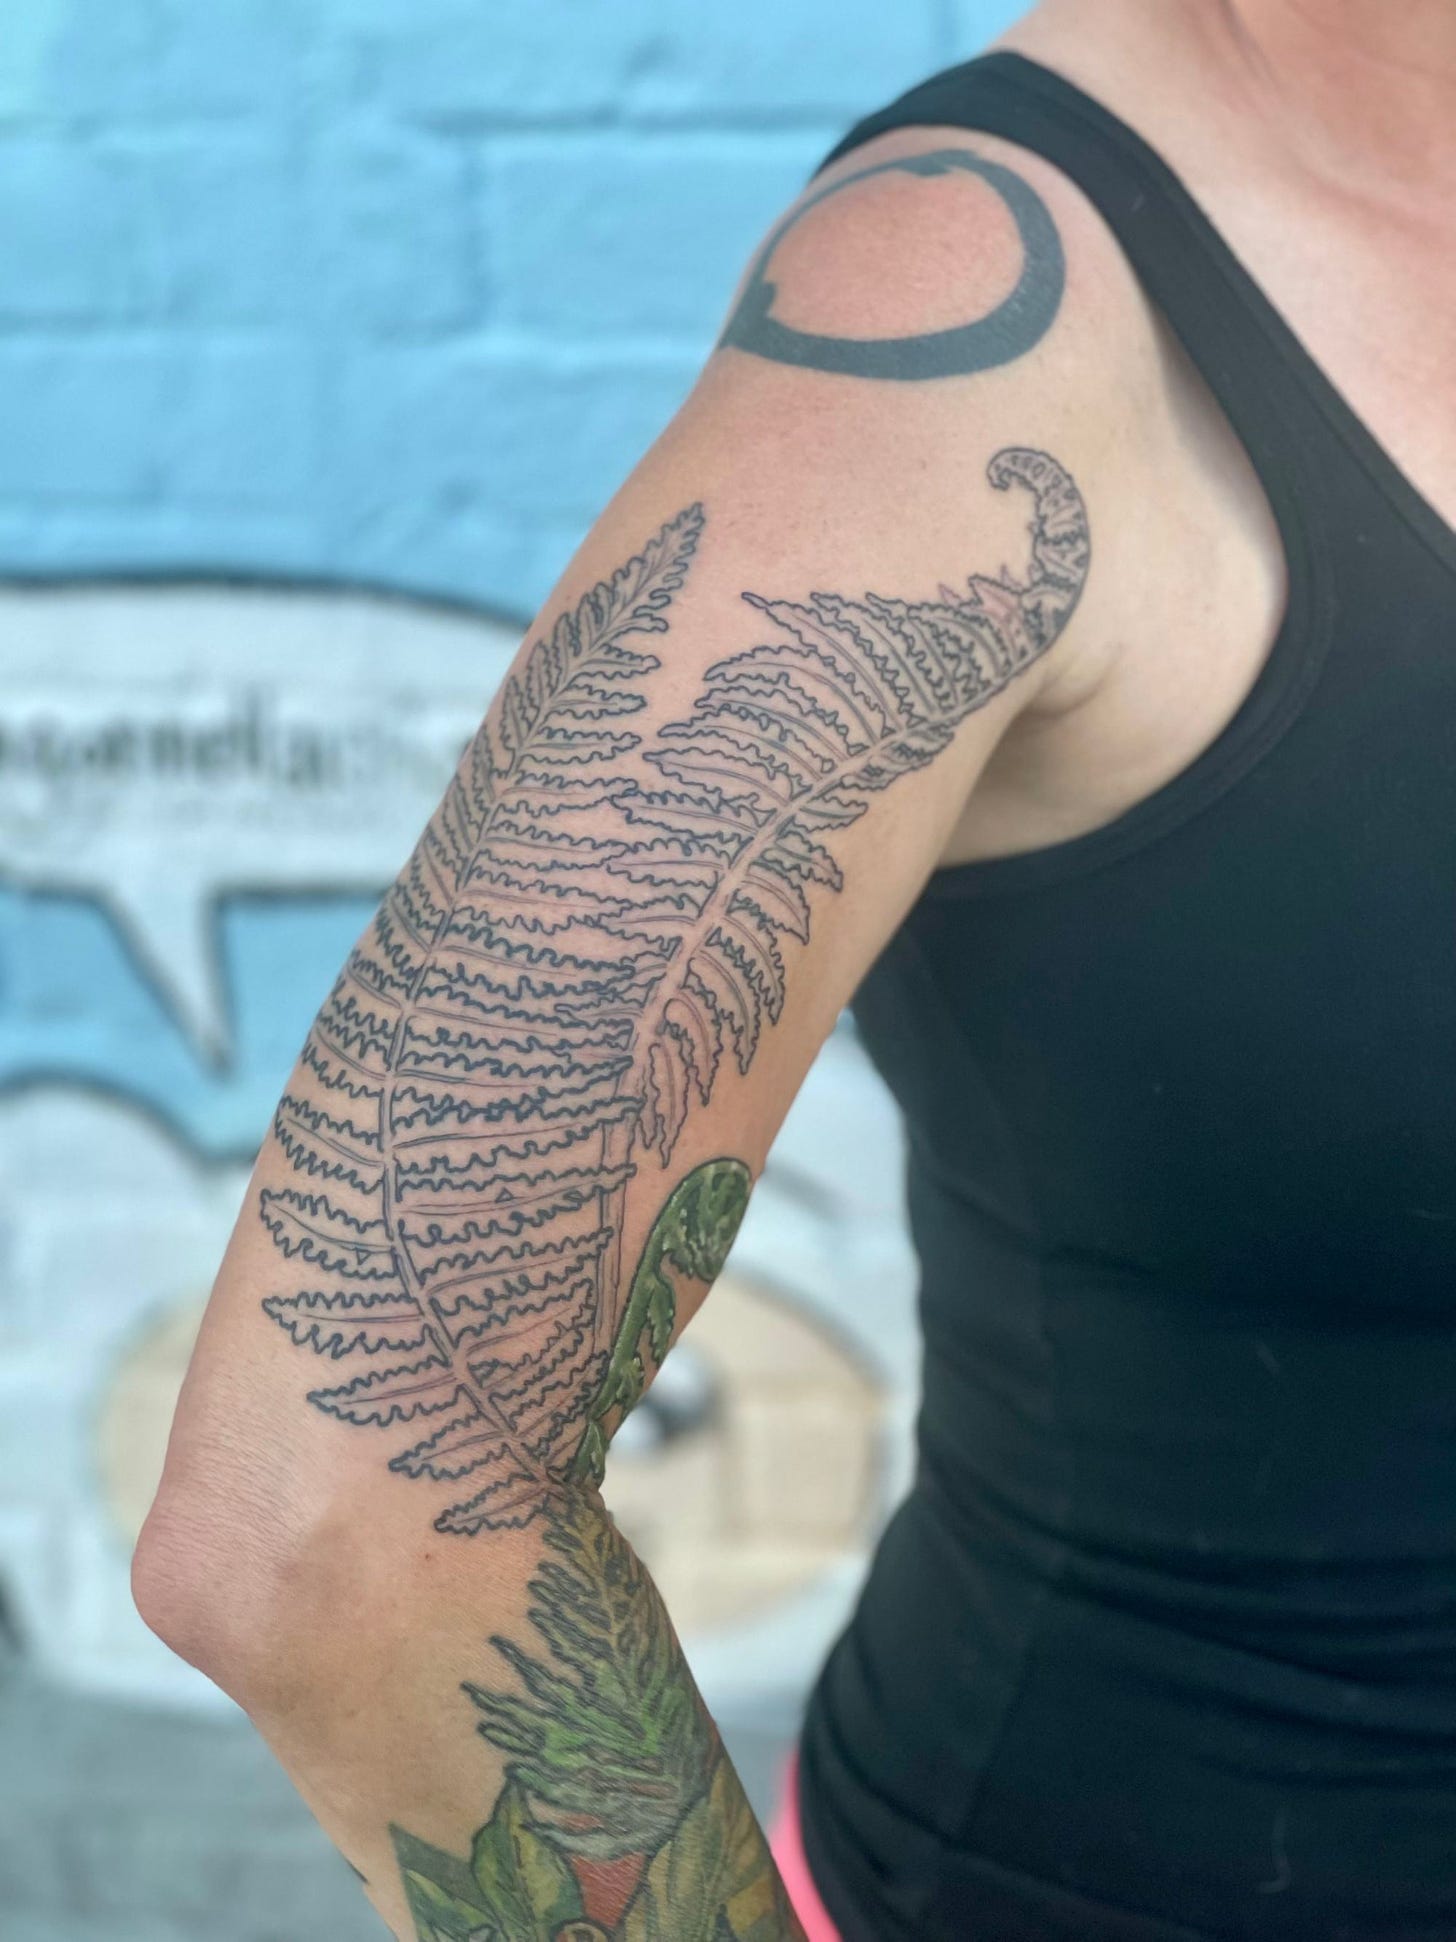 Accomplishing Goals, a Pre-Seed VC List, and a New Tattoo